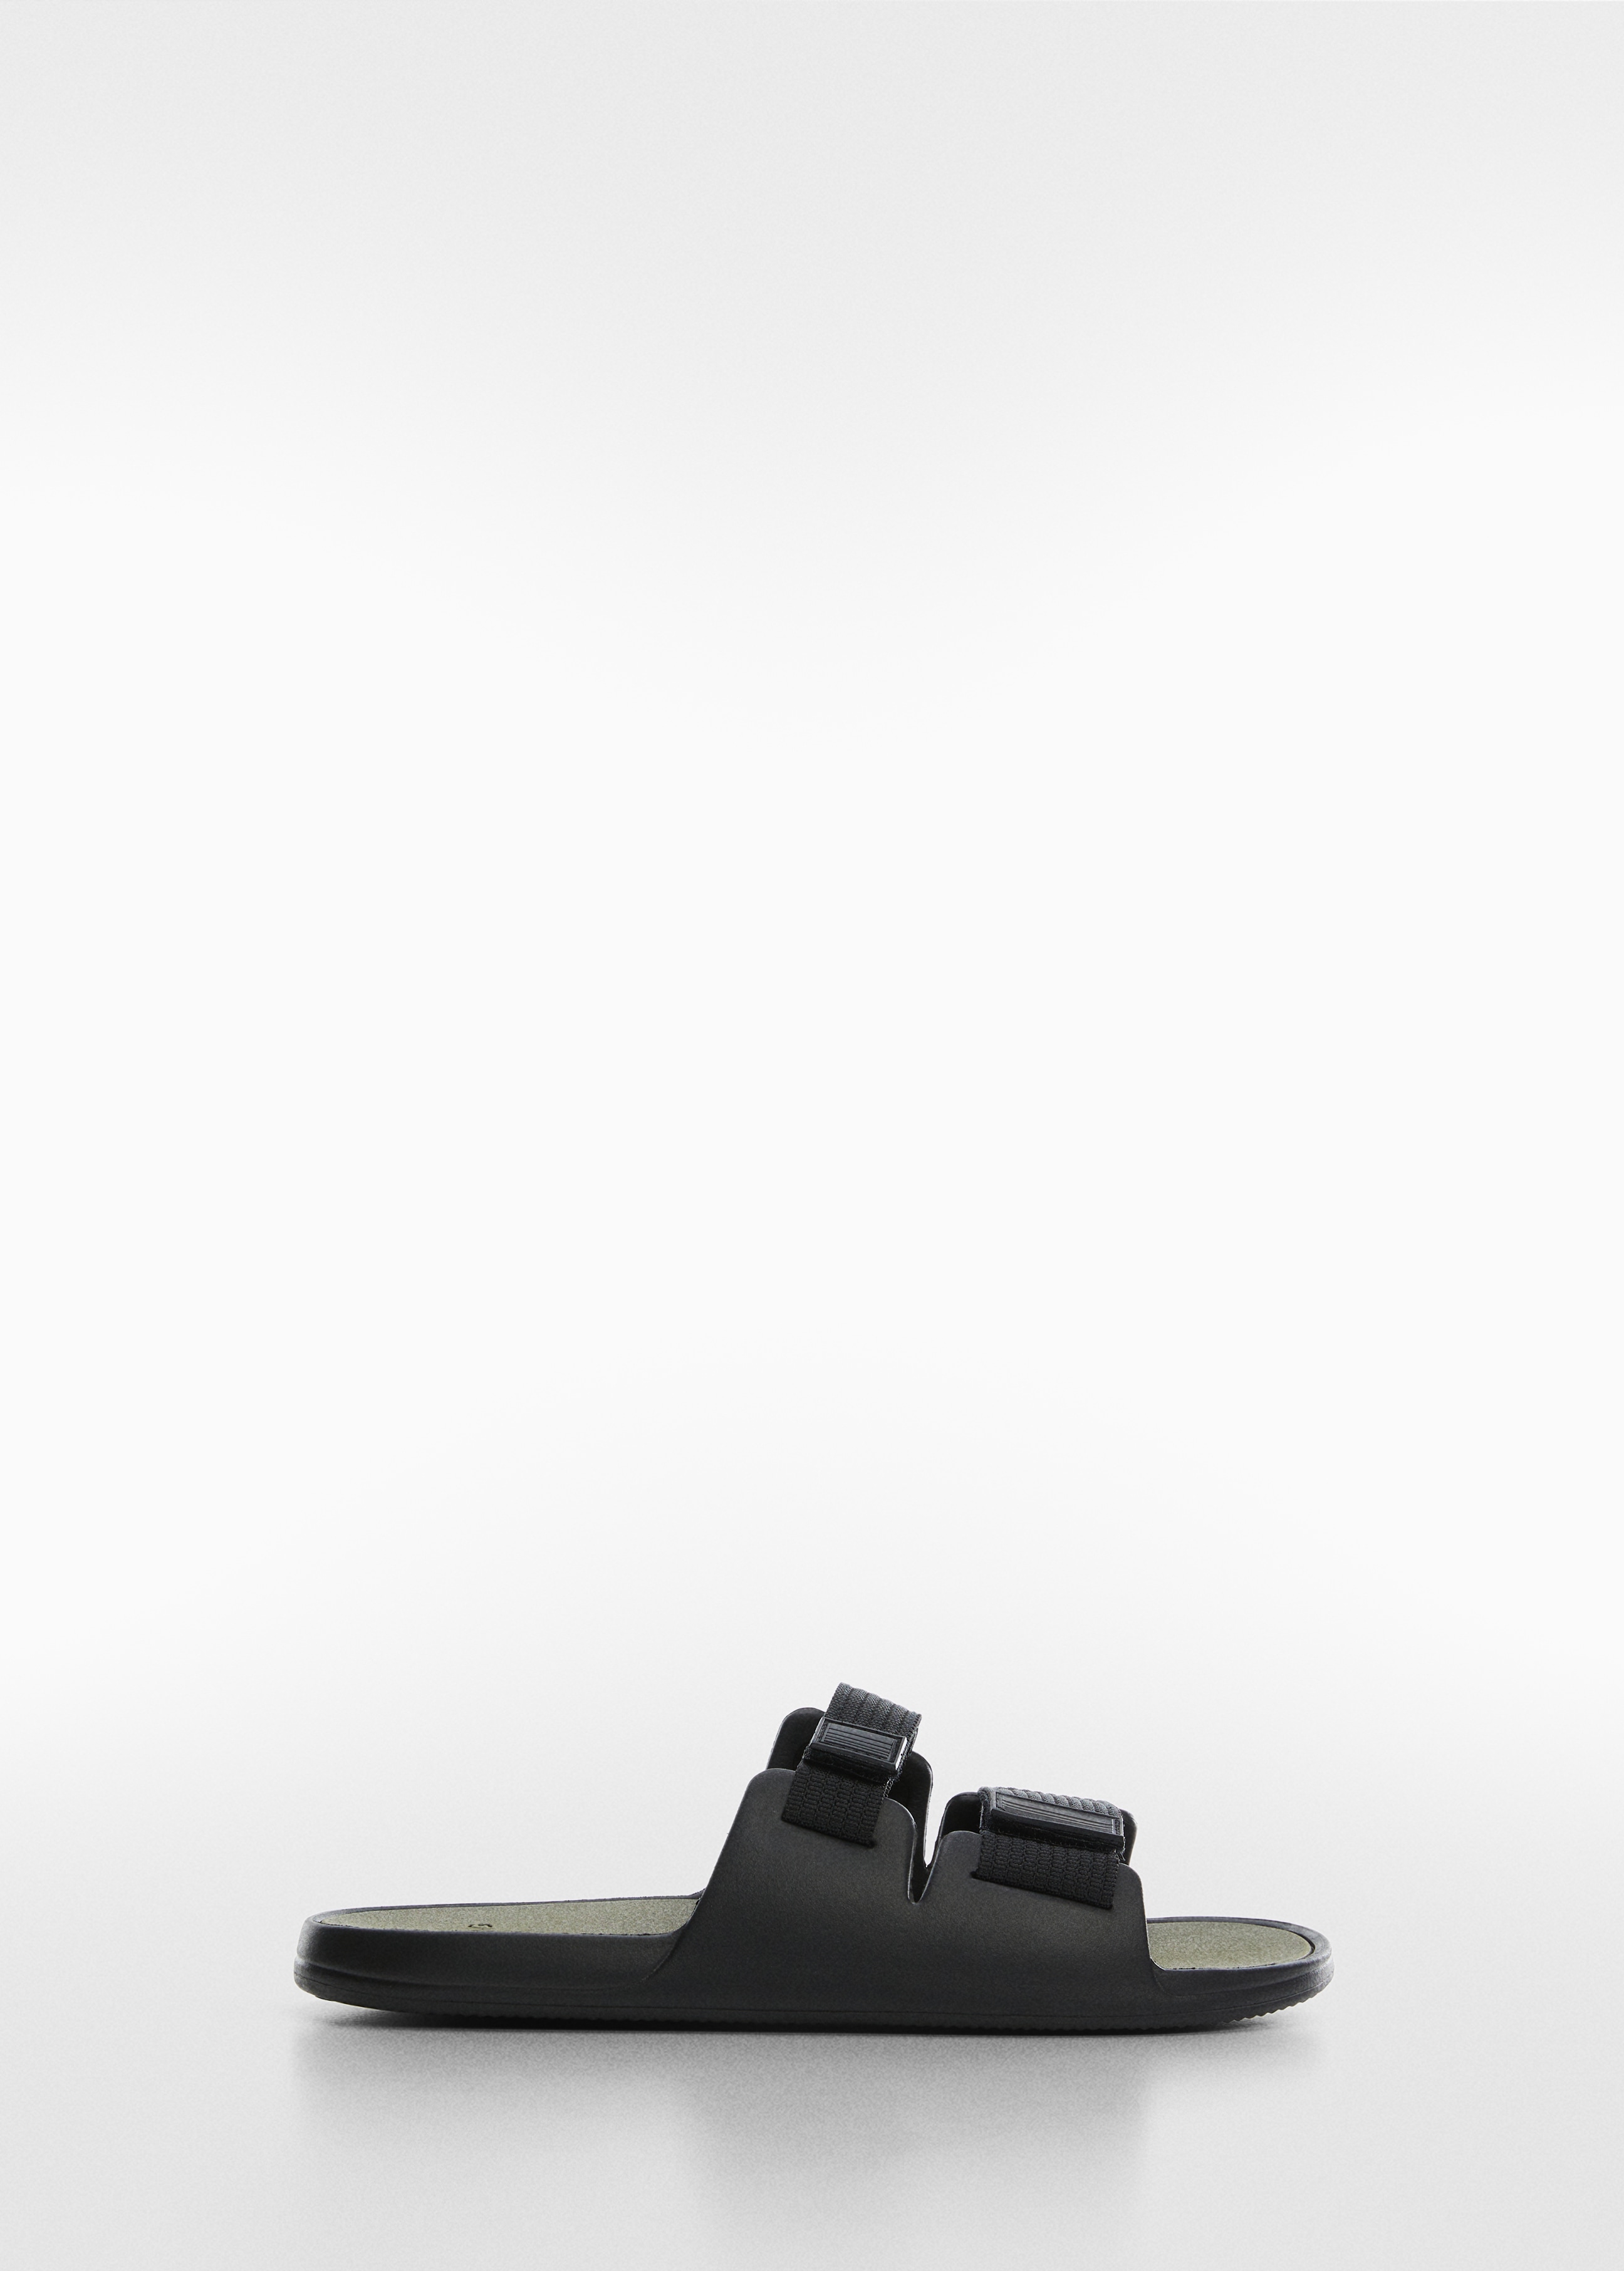 Velcro strap sandal - Article without model